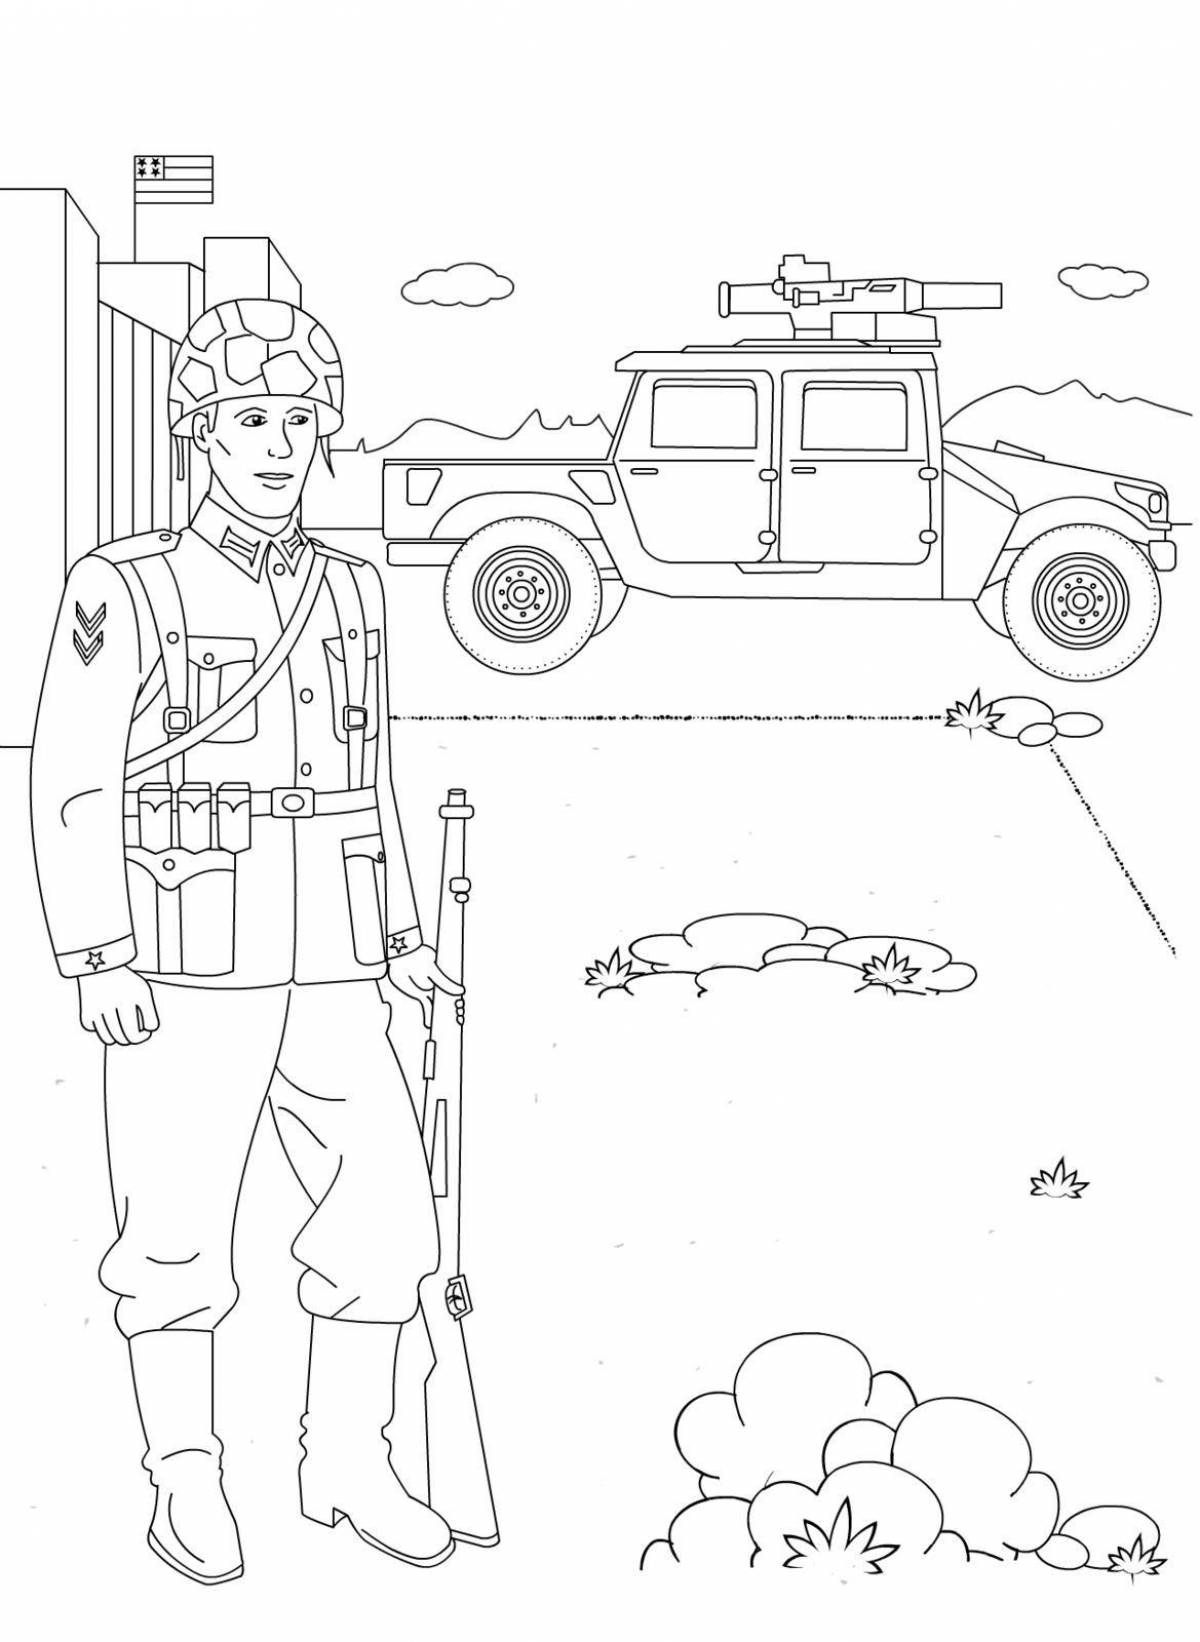 Adorable Russian soldier coloring book for kids